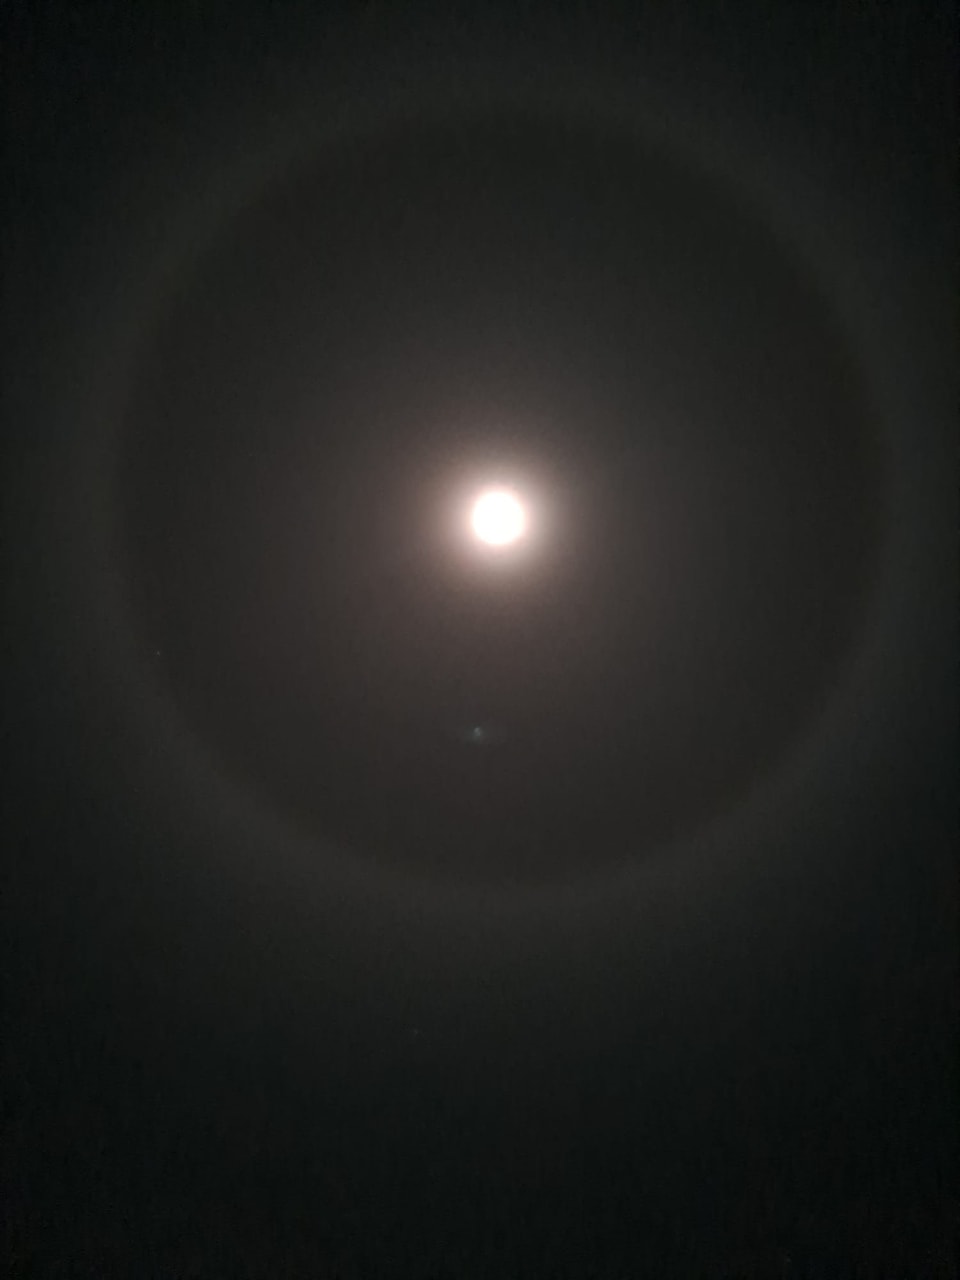 Can you tell us what the circle means.  Photo taken yesterday at around 9 p.m. in Samnaun.  Best regards